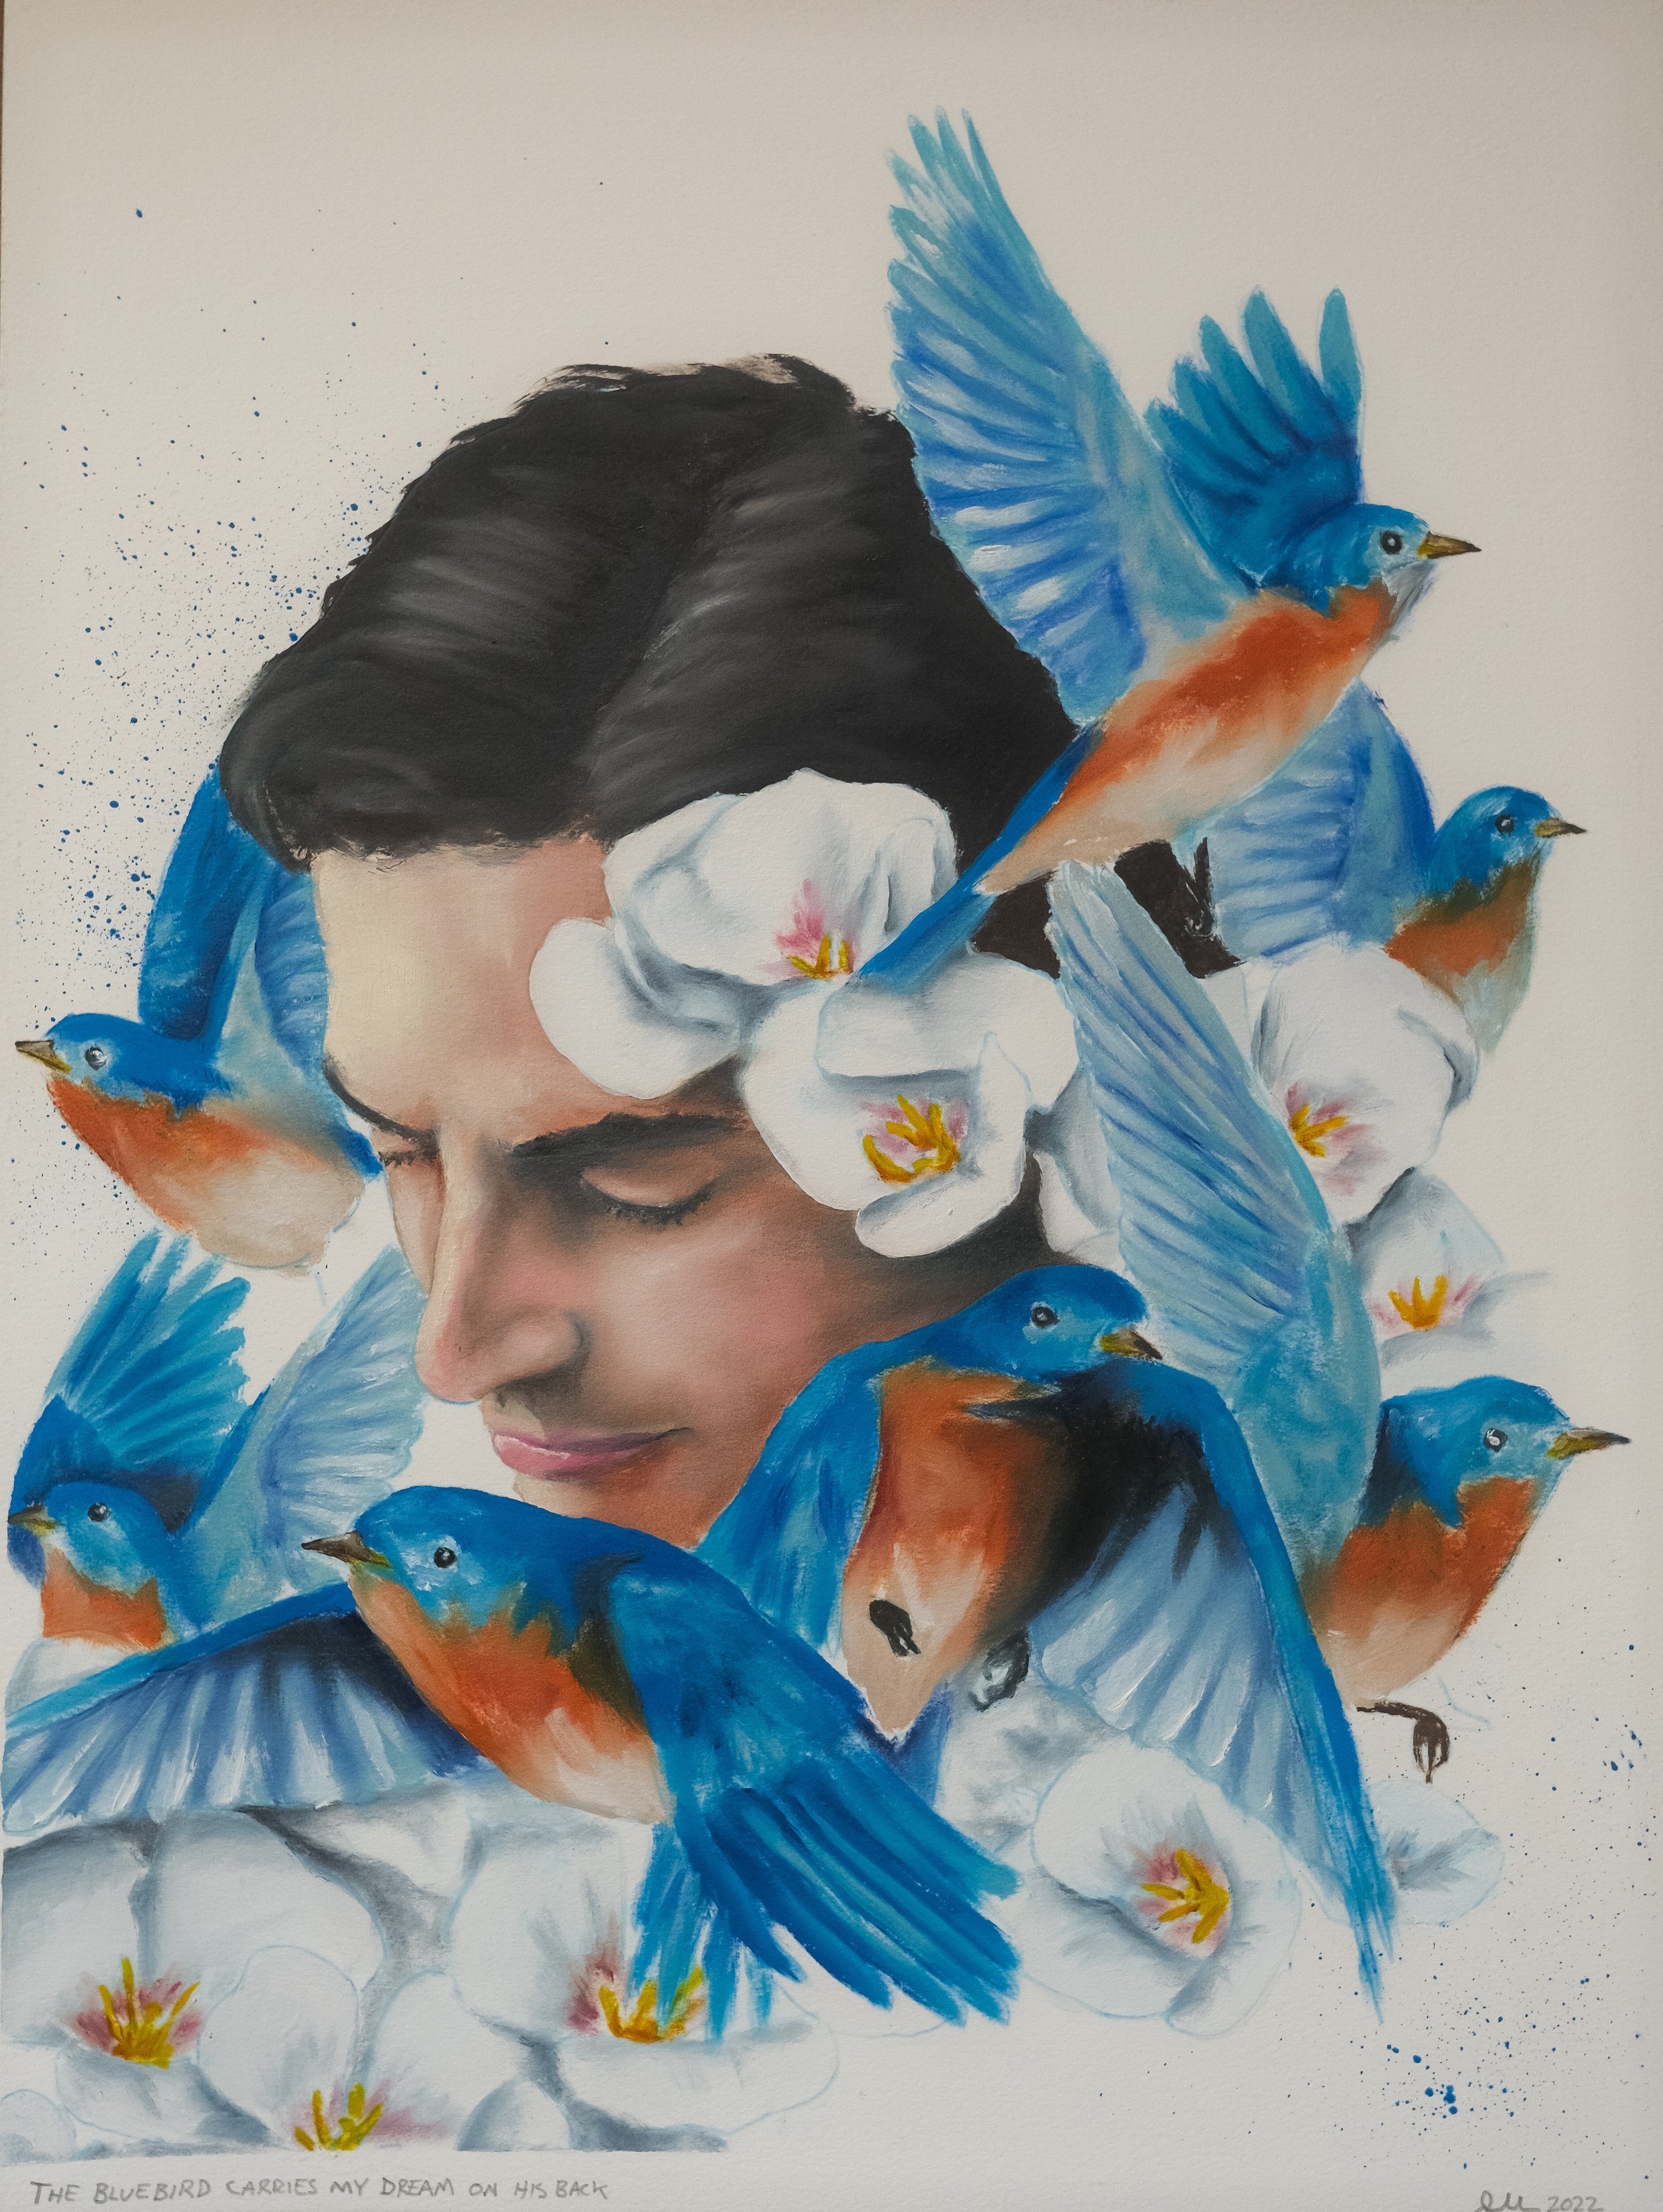   THE BLUEBIRD CARRIES MY DREAM ON HIS BACK   Oil on paper, 12x16”, 2022 